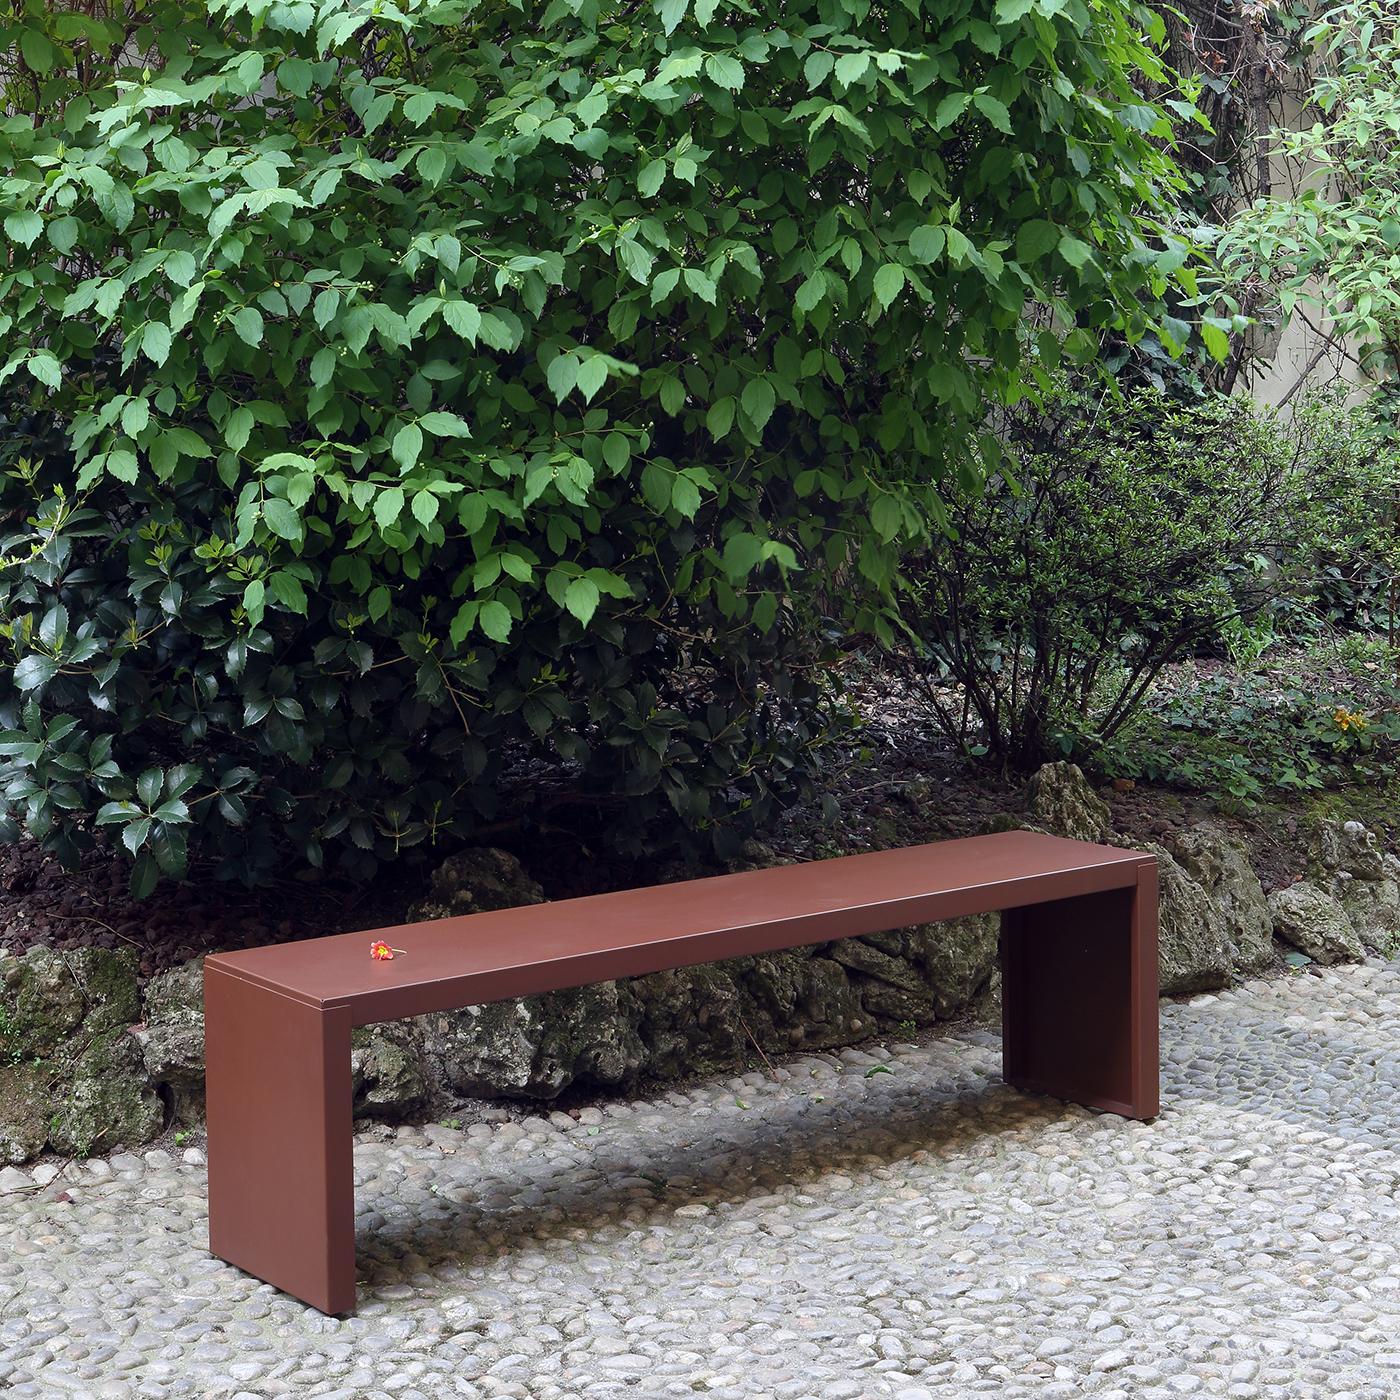 Designed with simple elegance in mind, this bench is a trusted companion for moments spent outdoors enjoying the caress of fresh air. Clean and rigorous lines define its minimalist yet bold structure, fashioned of rust-toned metal and offered in an